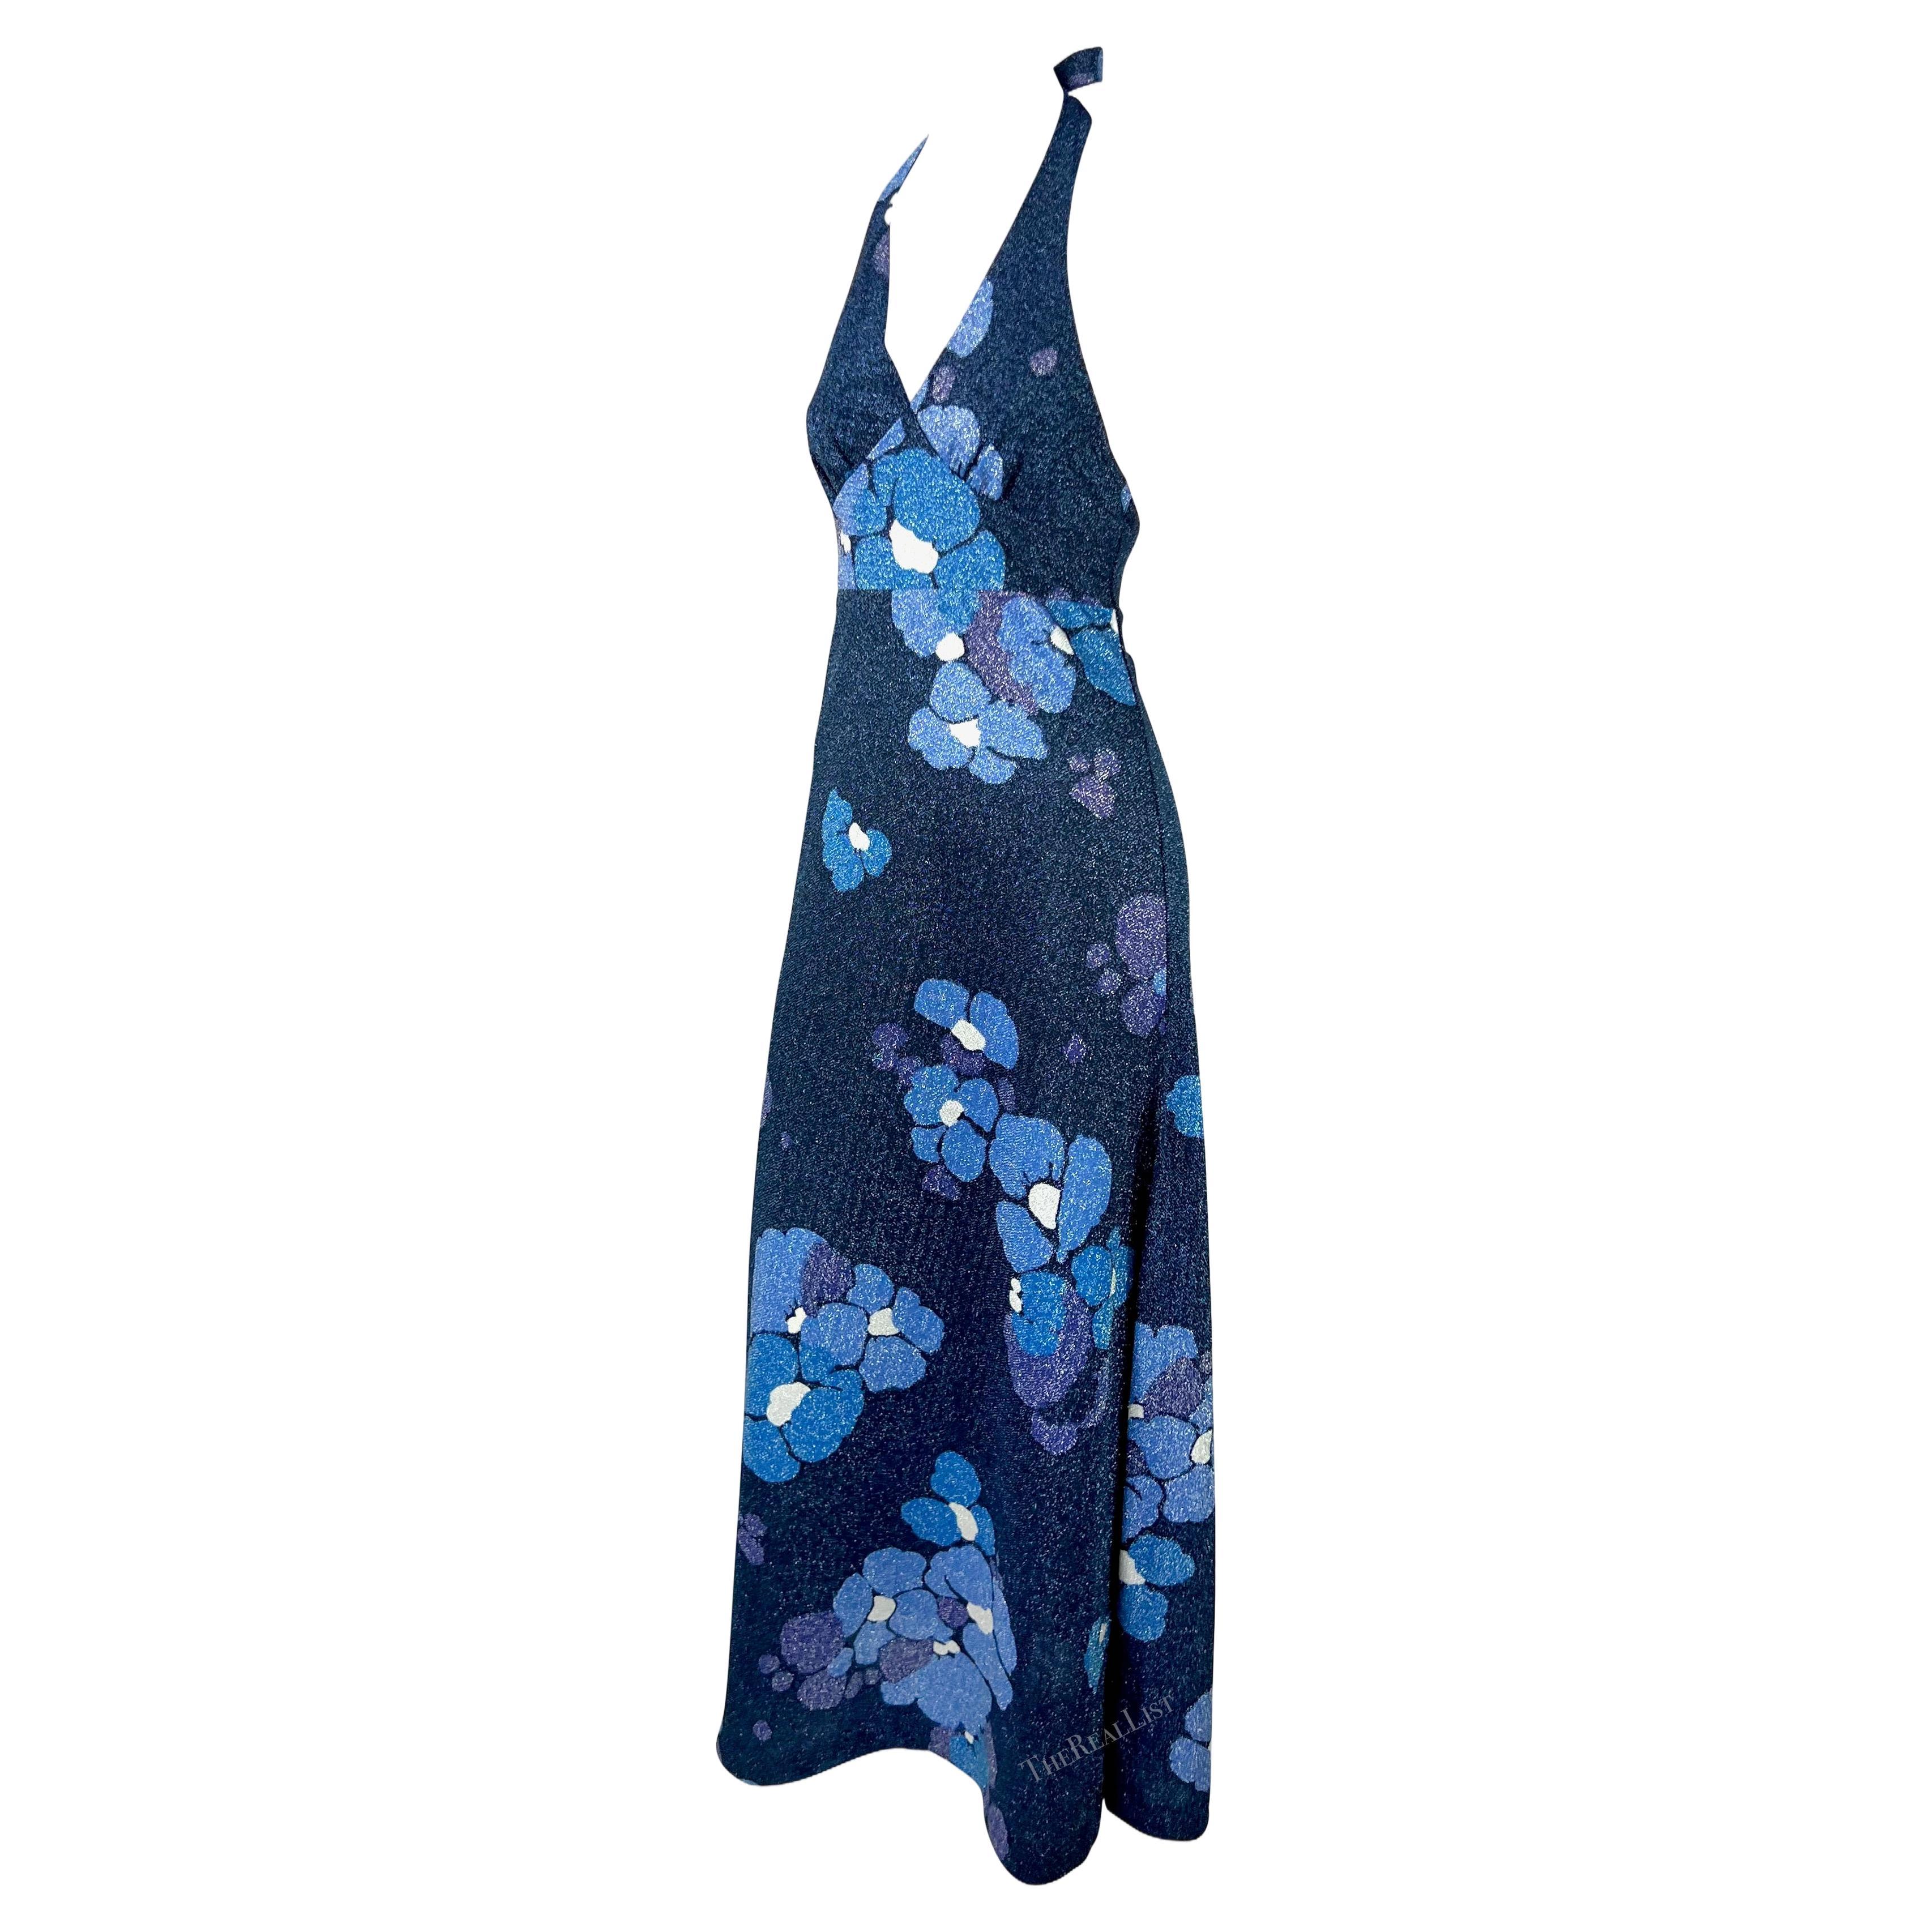 Presenting a dazzling blue floral Paco Rabanne halterneck gown from the 1970s. This luminous lurex gown boasts a metallic blue floral pattern throughout. Its floor-length design includes a deep v-neckline, halter neck tie, and a partially exposed